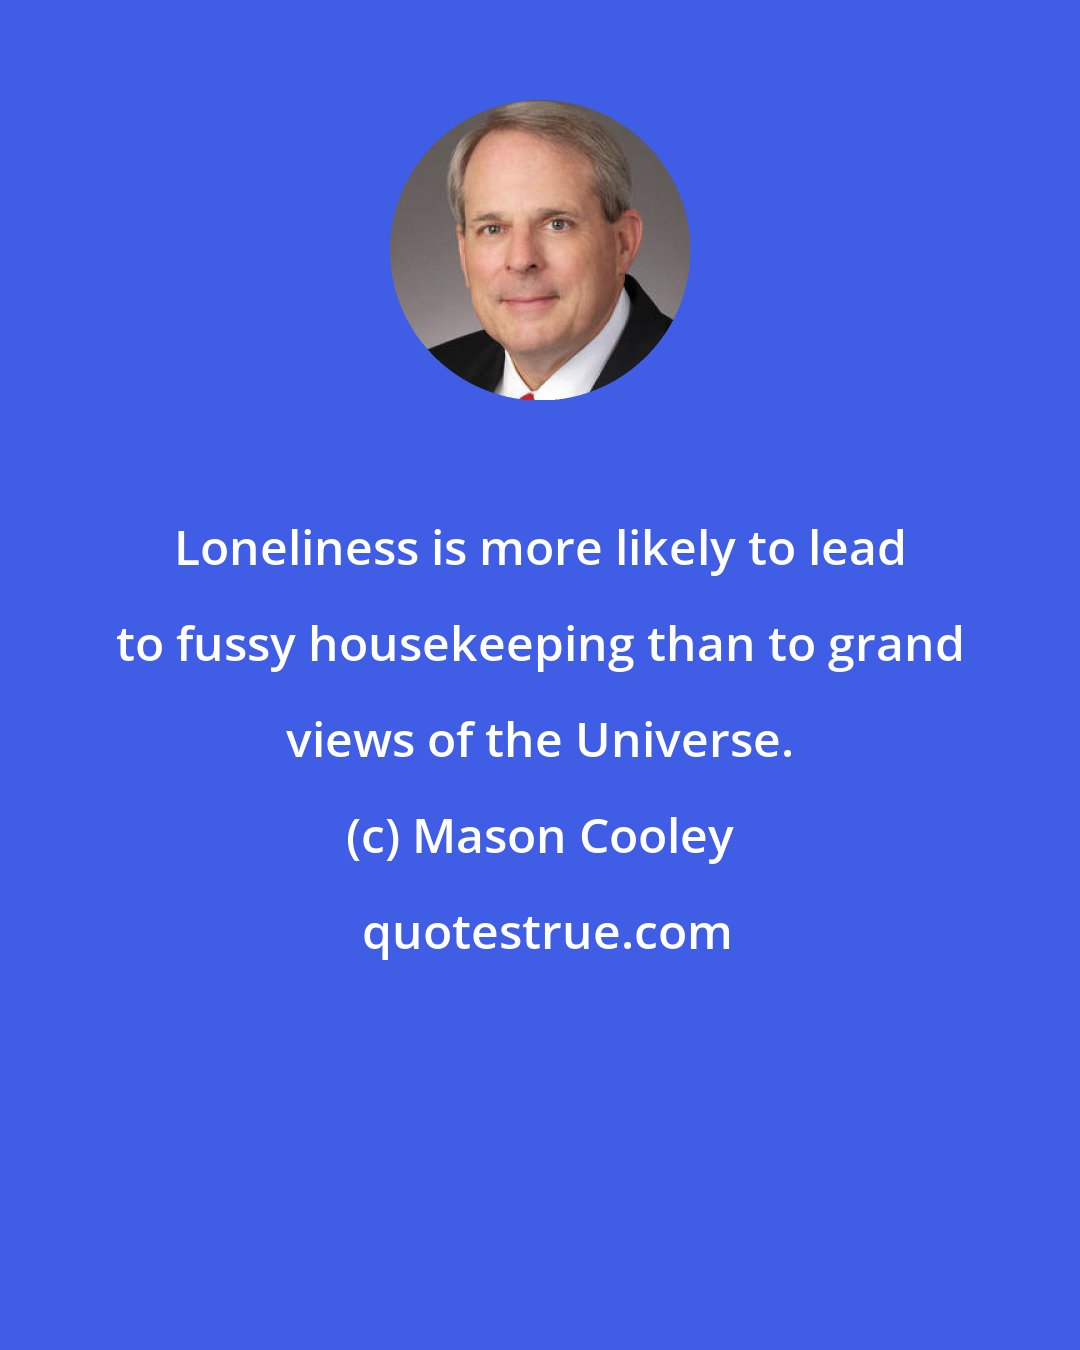 Mason Cooley: Loneliness is more likely to lead to fussy housekeeping than to grand views of the Universe.